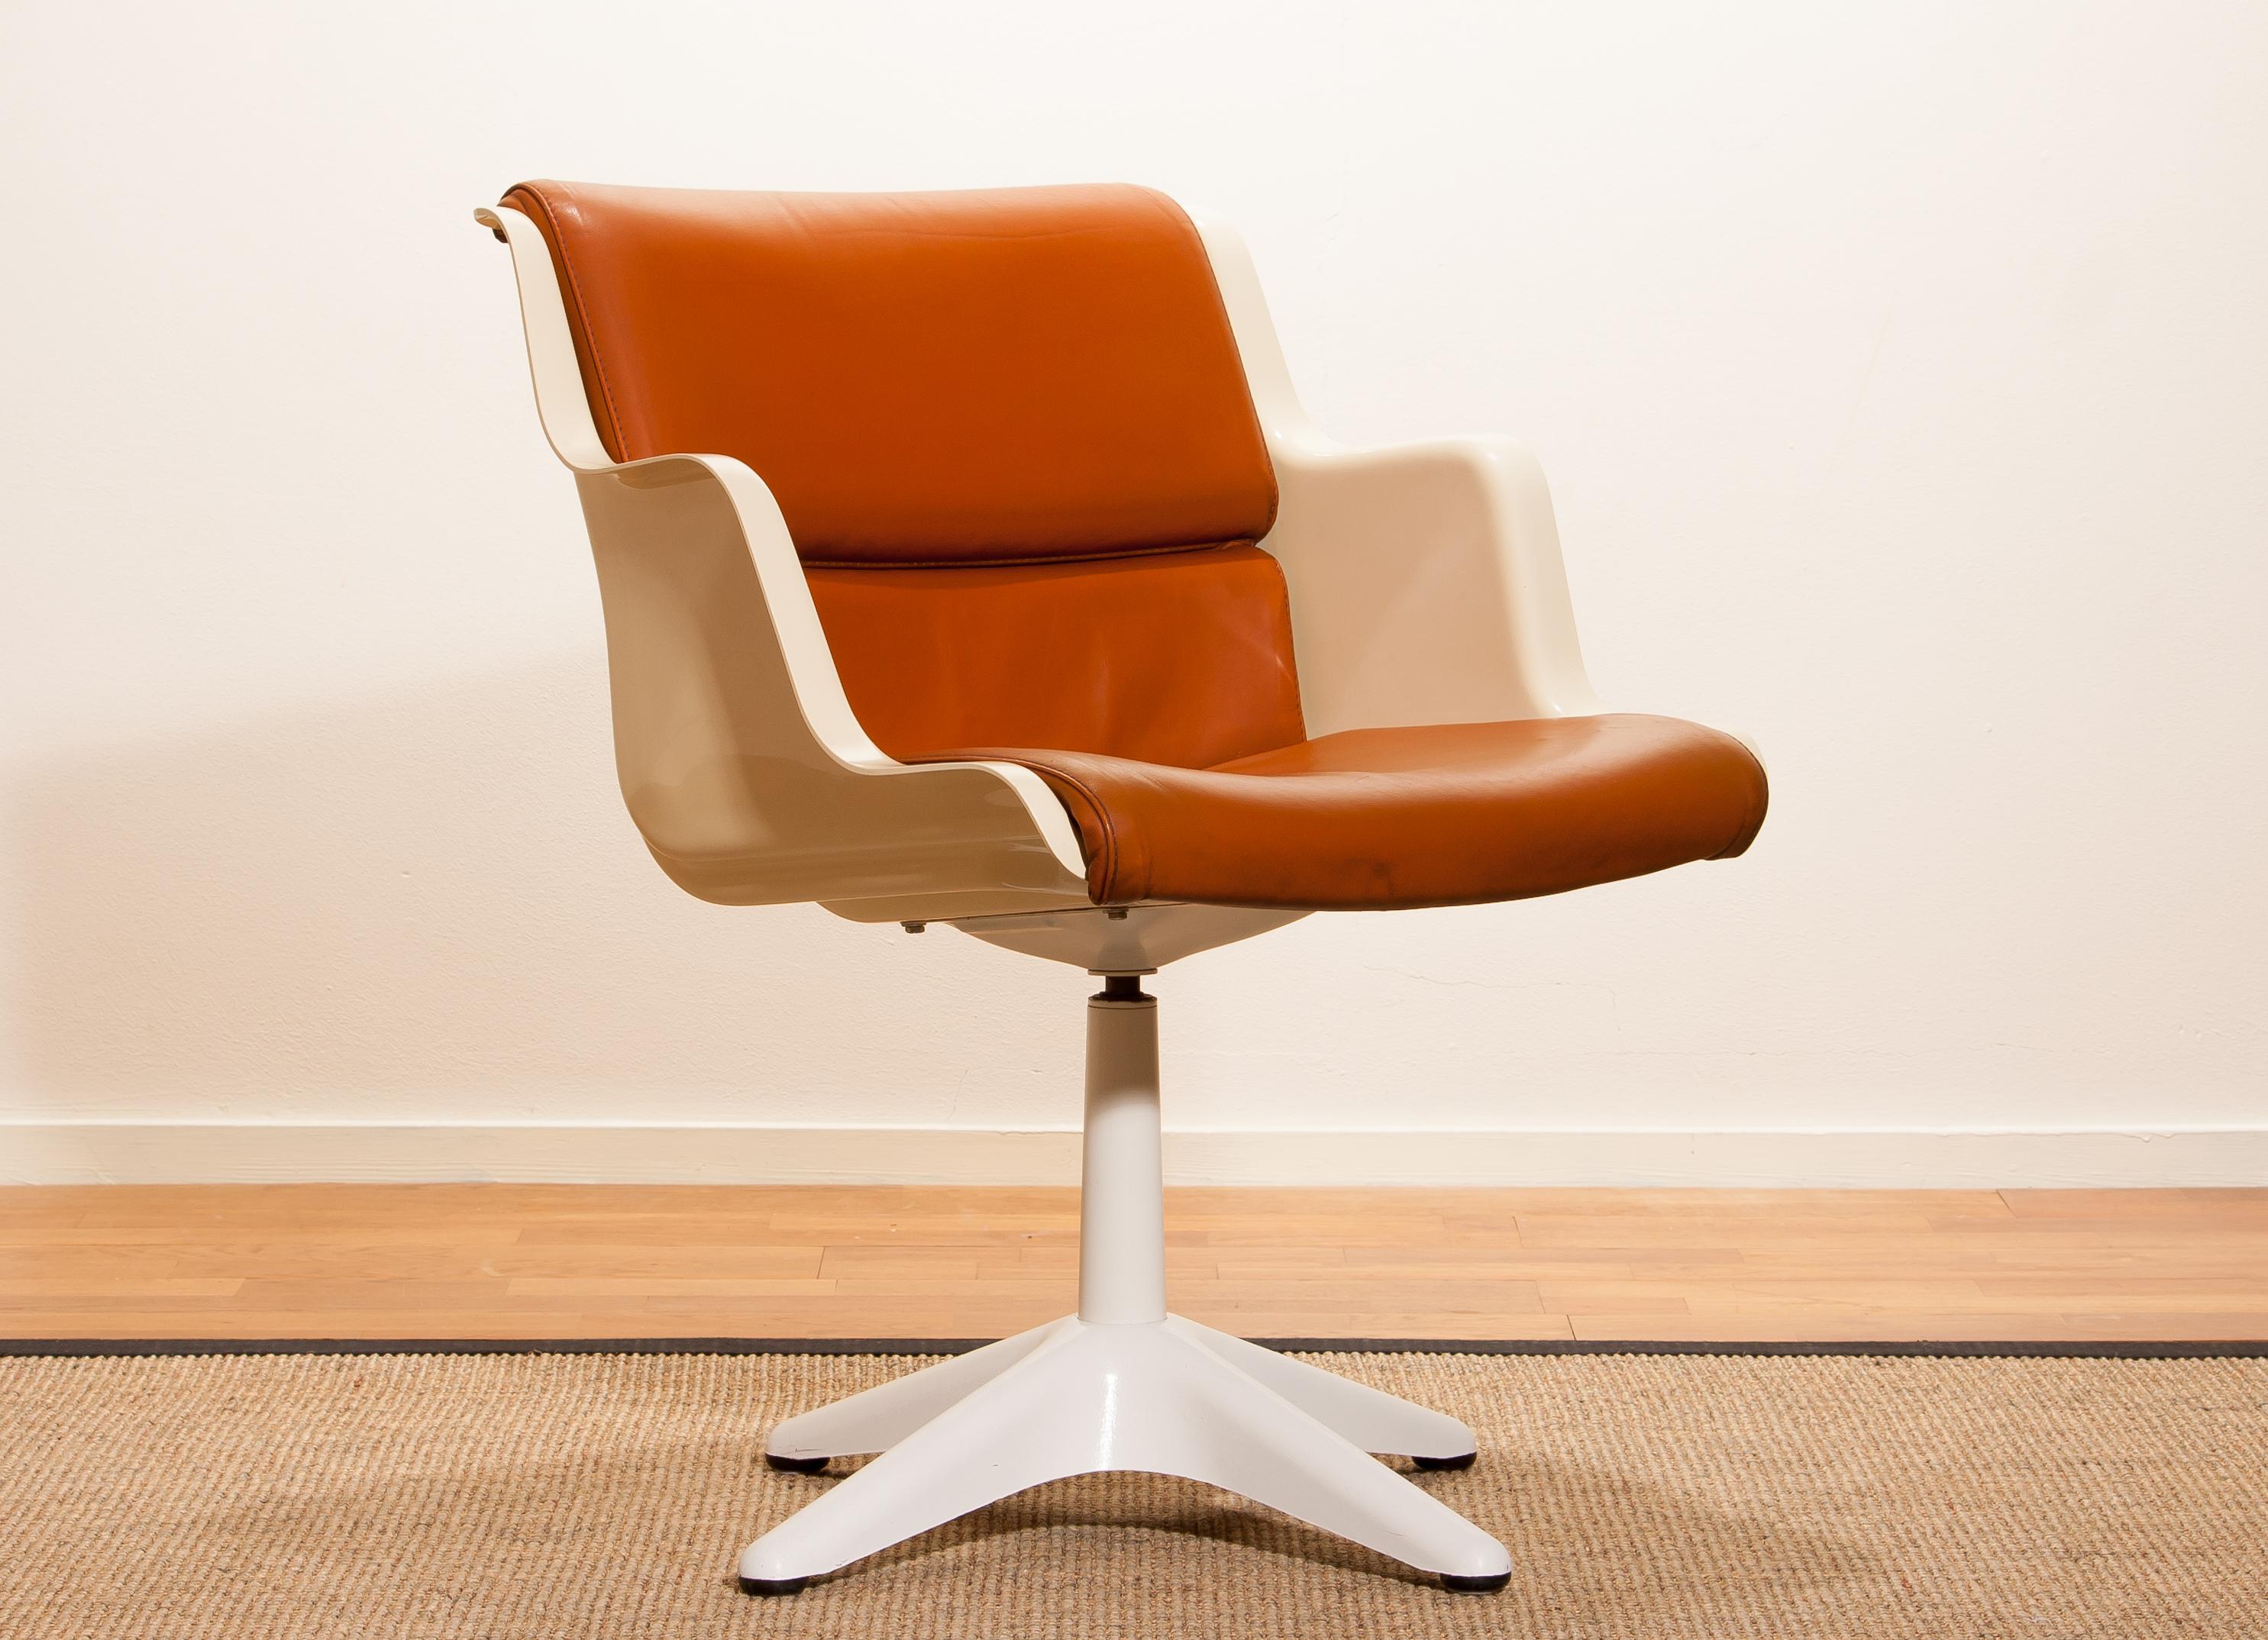 Beautiful desk chair designed by Yrjö Kukkapuro for Haimi, Finland.
This chair is made of a cognac leather seating in a off-white fiberglass shell on a white lacquered metal swivel stand.
The chair is labelled.
It is in a very nice